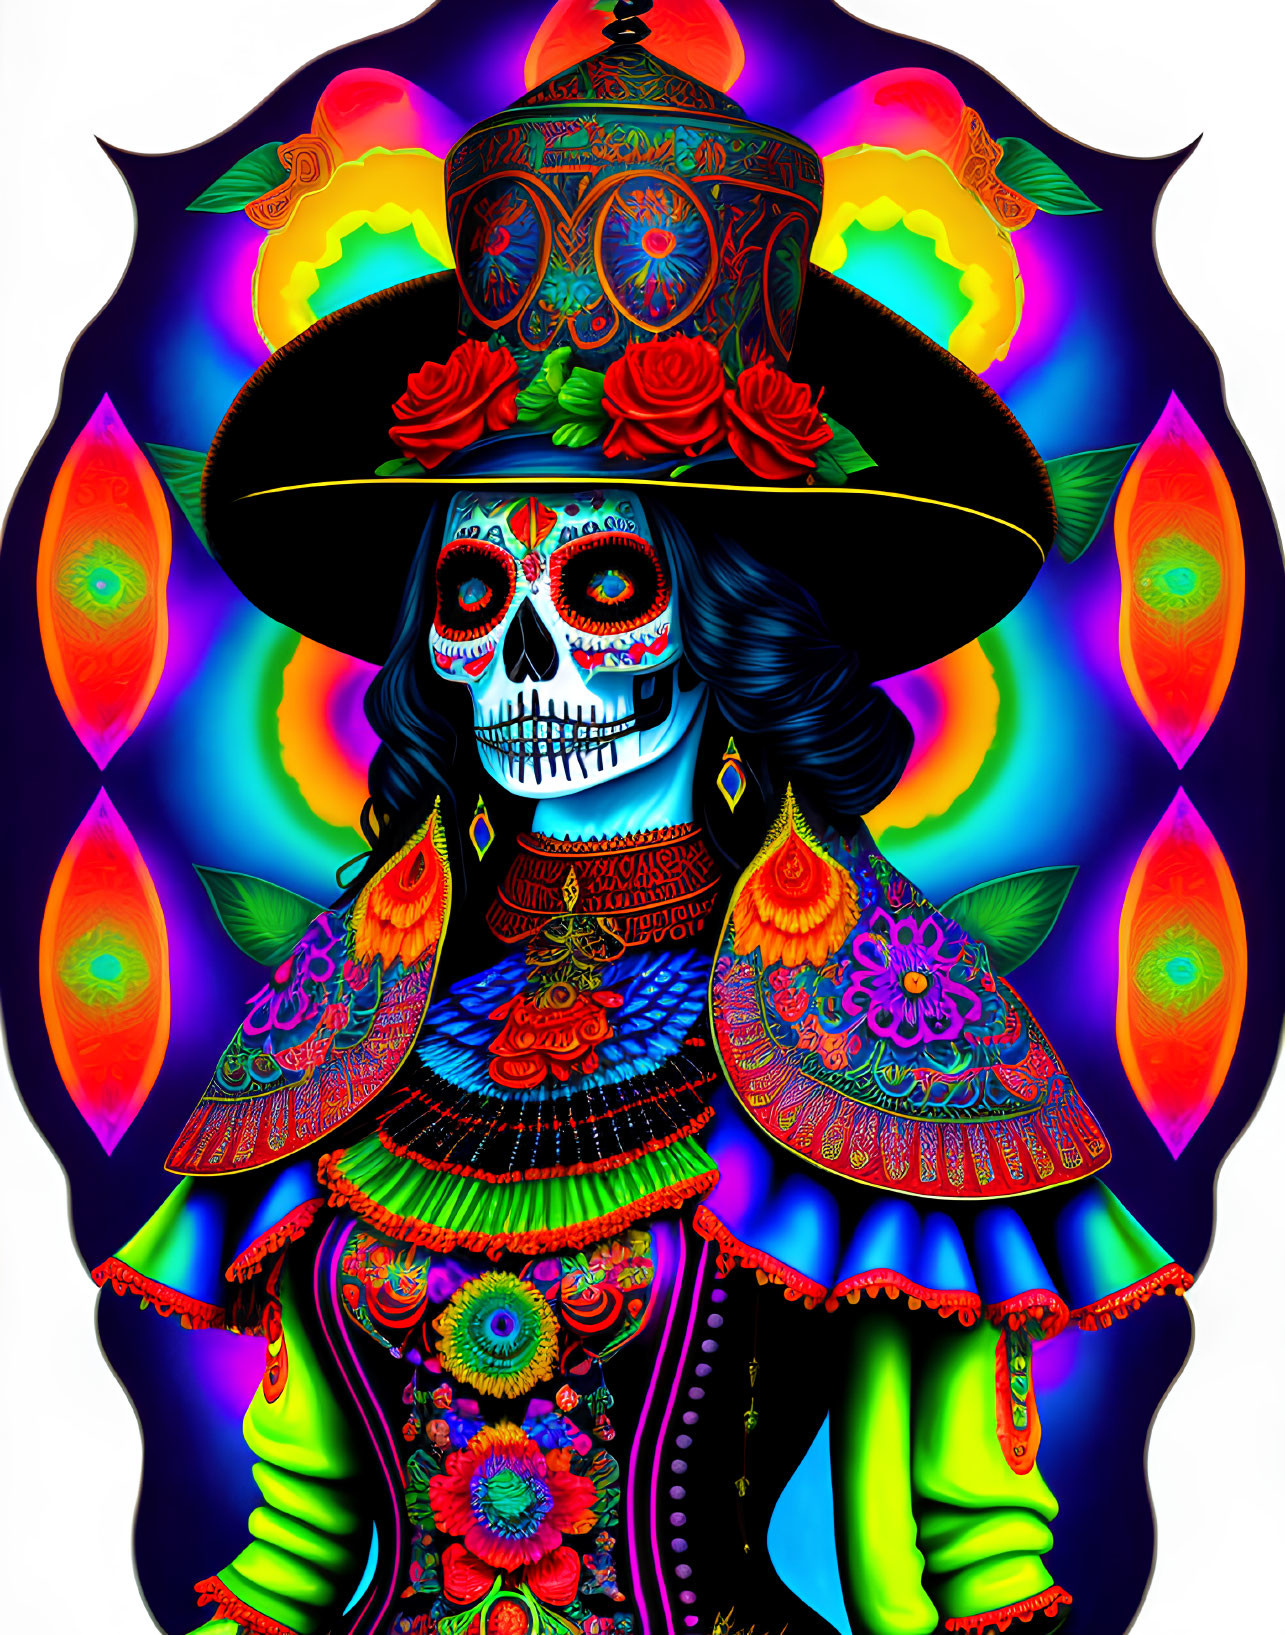 Colorful Skeleton in Mexican Attire with Floral and Flame Motifs